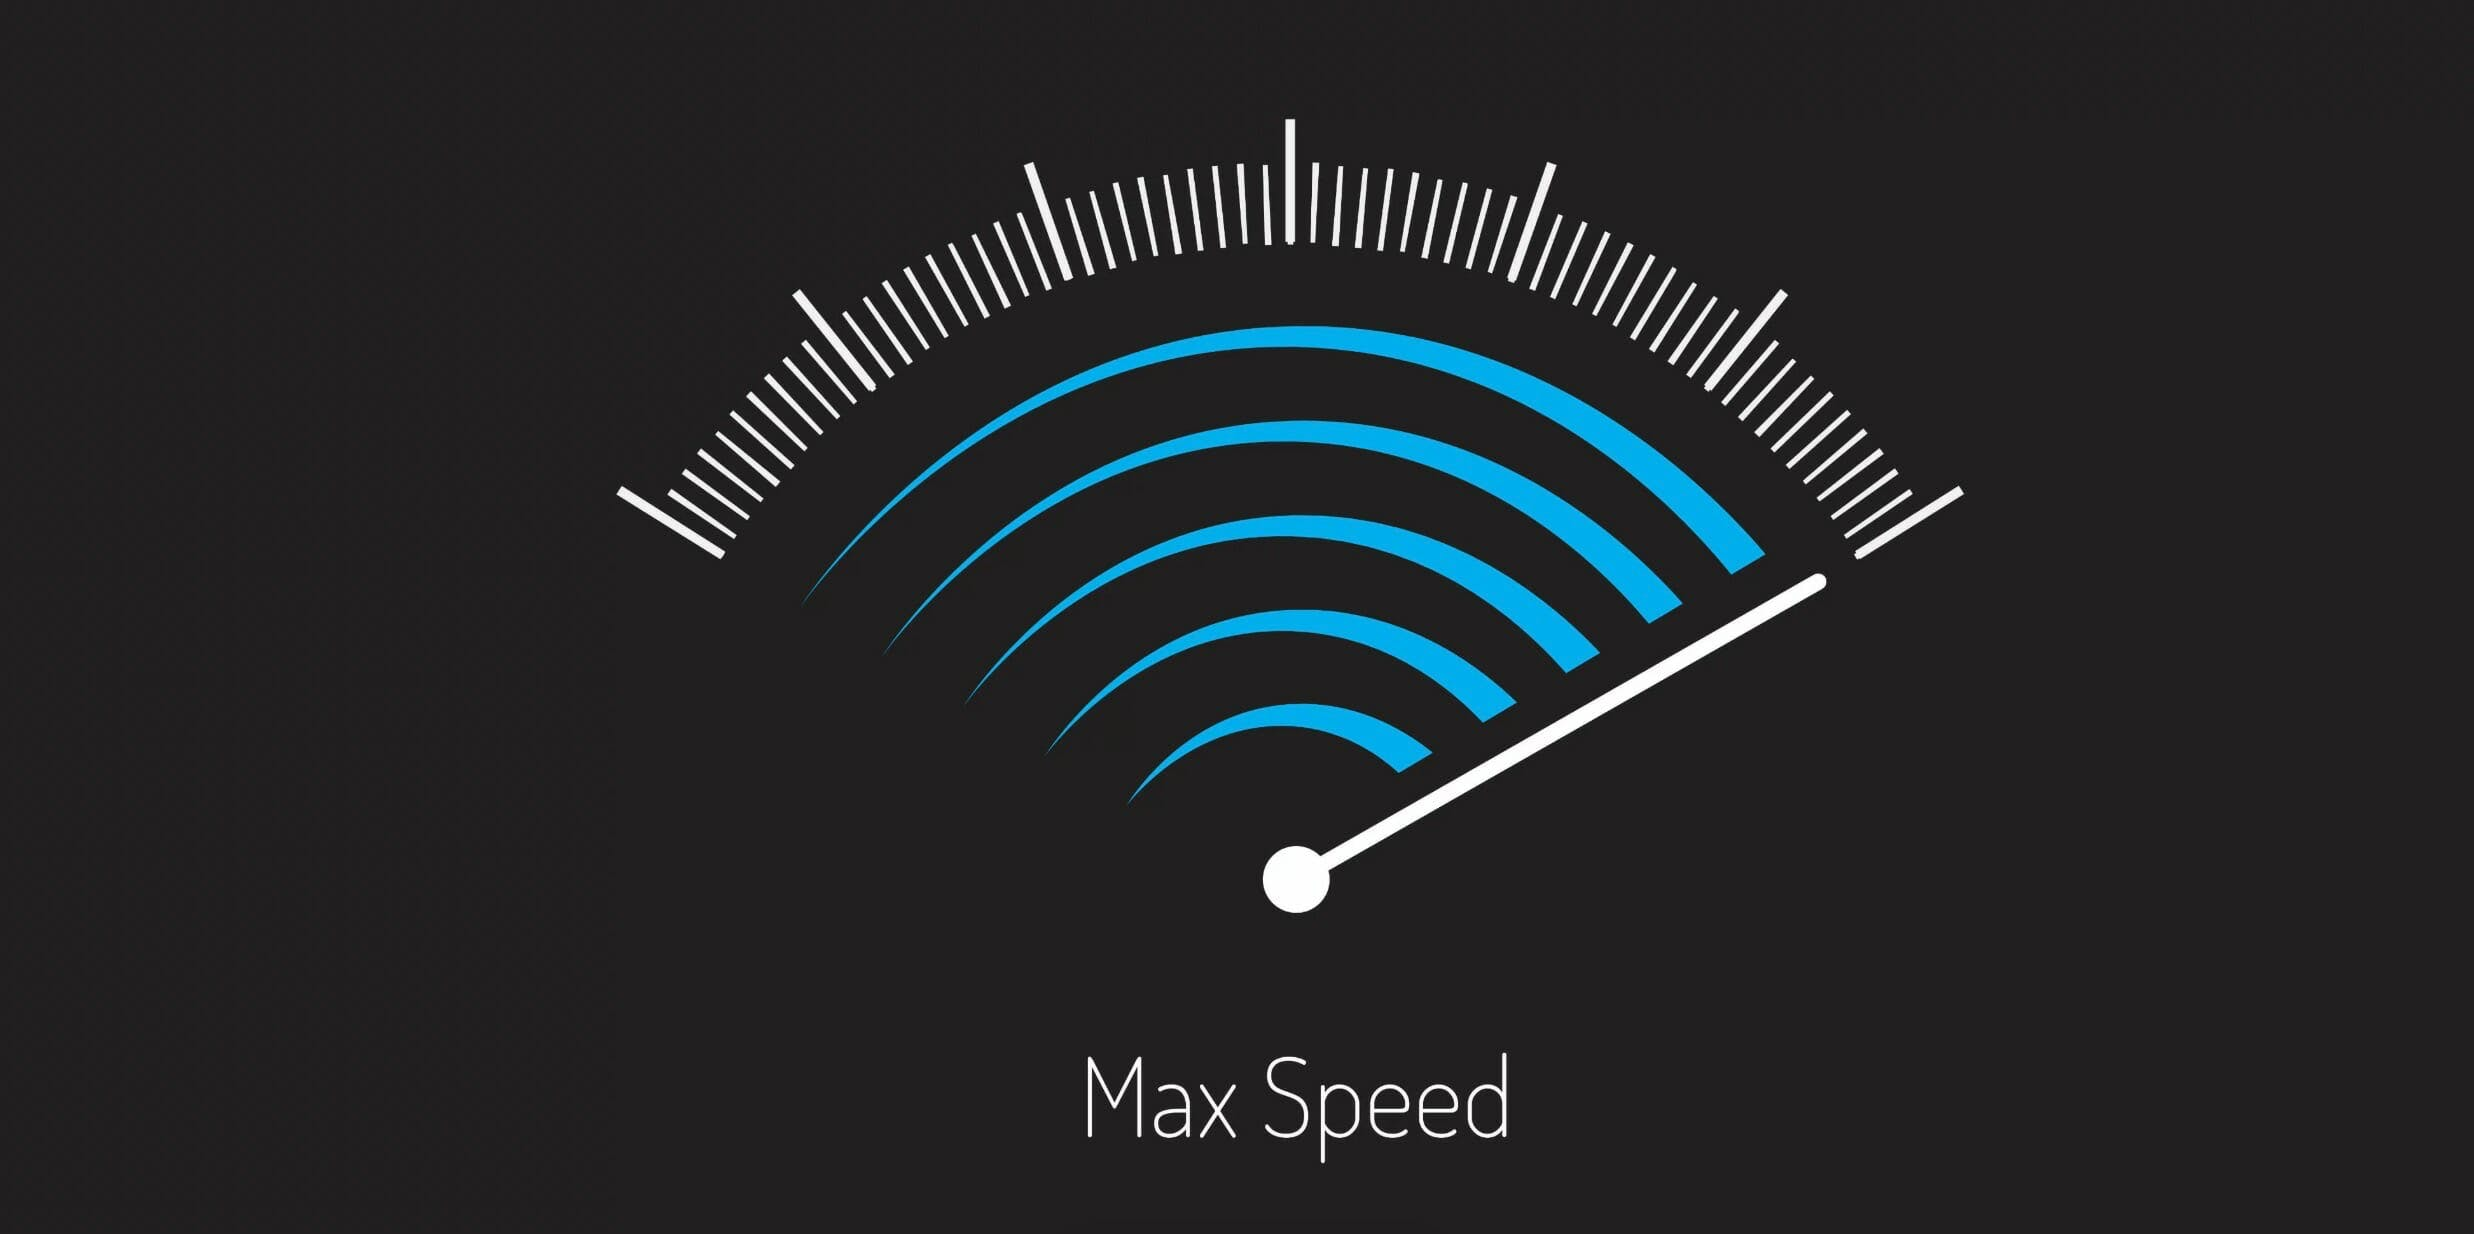 What is a Good WiFi Speed?